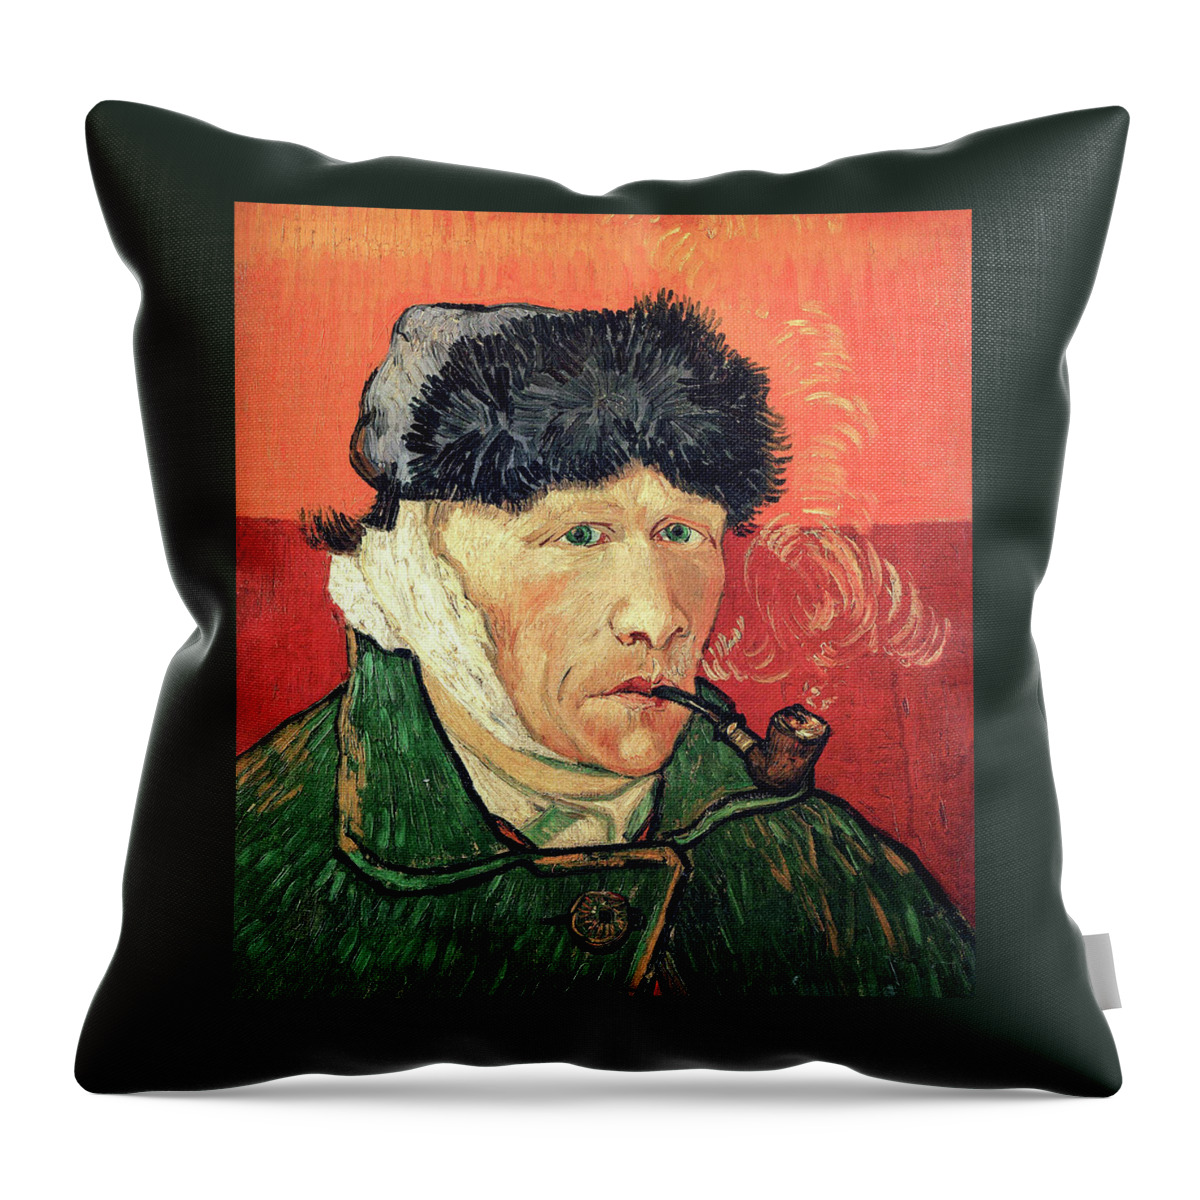 Self Portrait With A Bandaged Ear And Pipe Throw Pillow featuring the painting Self Portrait With a Bandaged Ear and Pipe by Vincent van Gogh 1889 by Vincent van Gogh